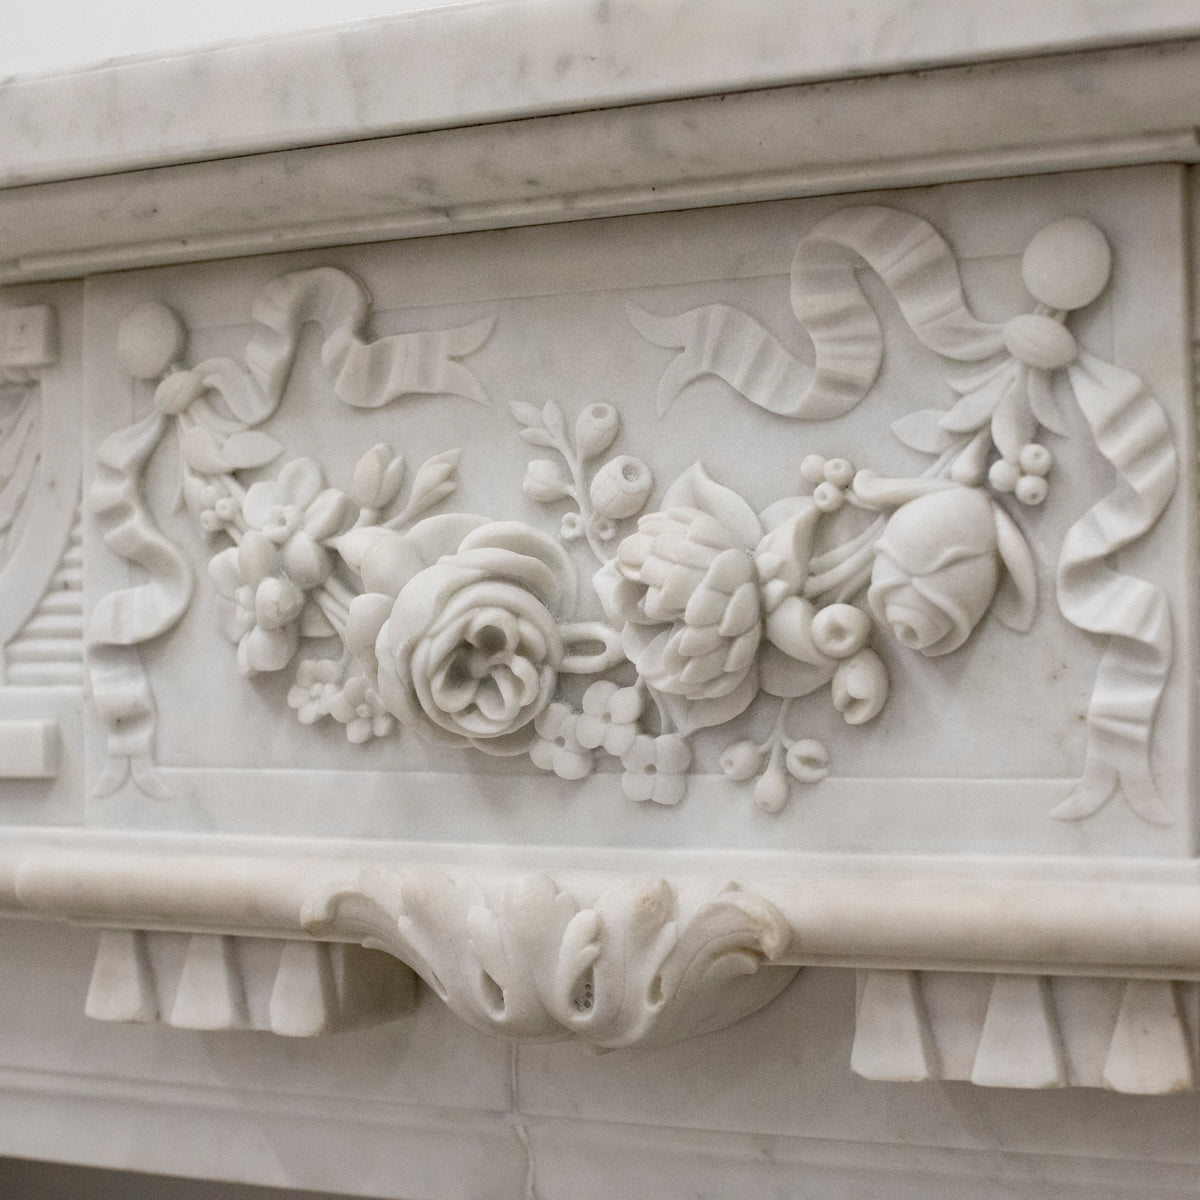 Antique 19th Century Carrara Marble Fireplace | The Architectural Forum